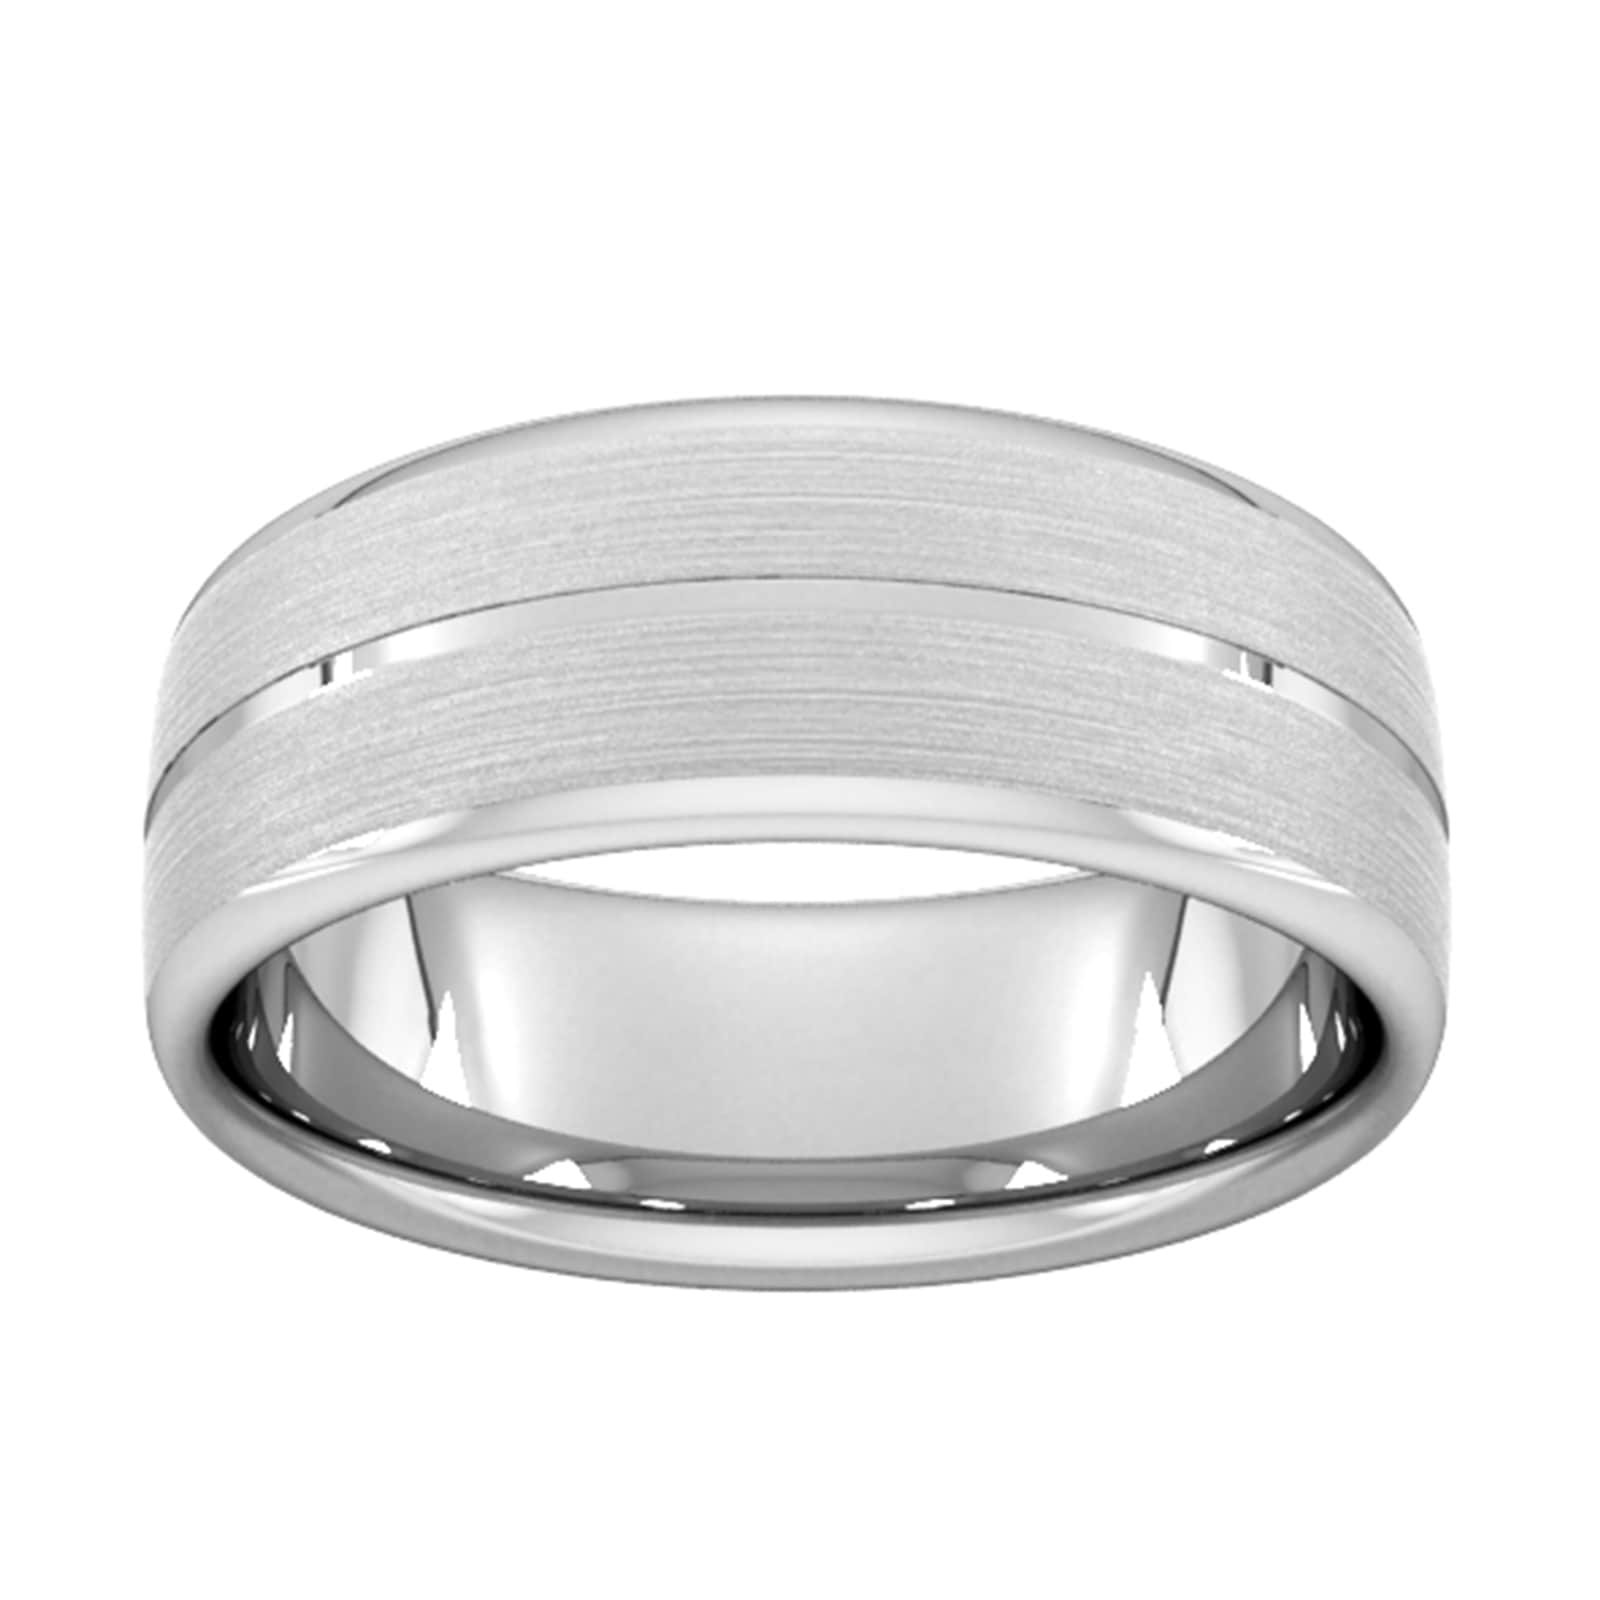 8mm Slight Court Standard Centre Groove With Chamfered Edge Wedding Ring In 9 Carat White Gold - Ring Size U